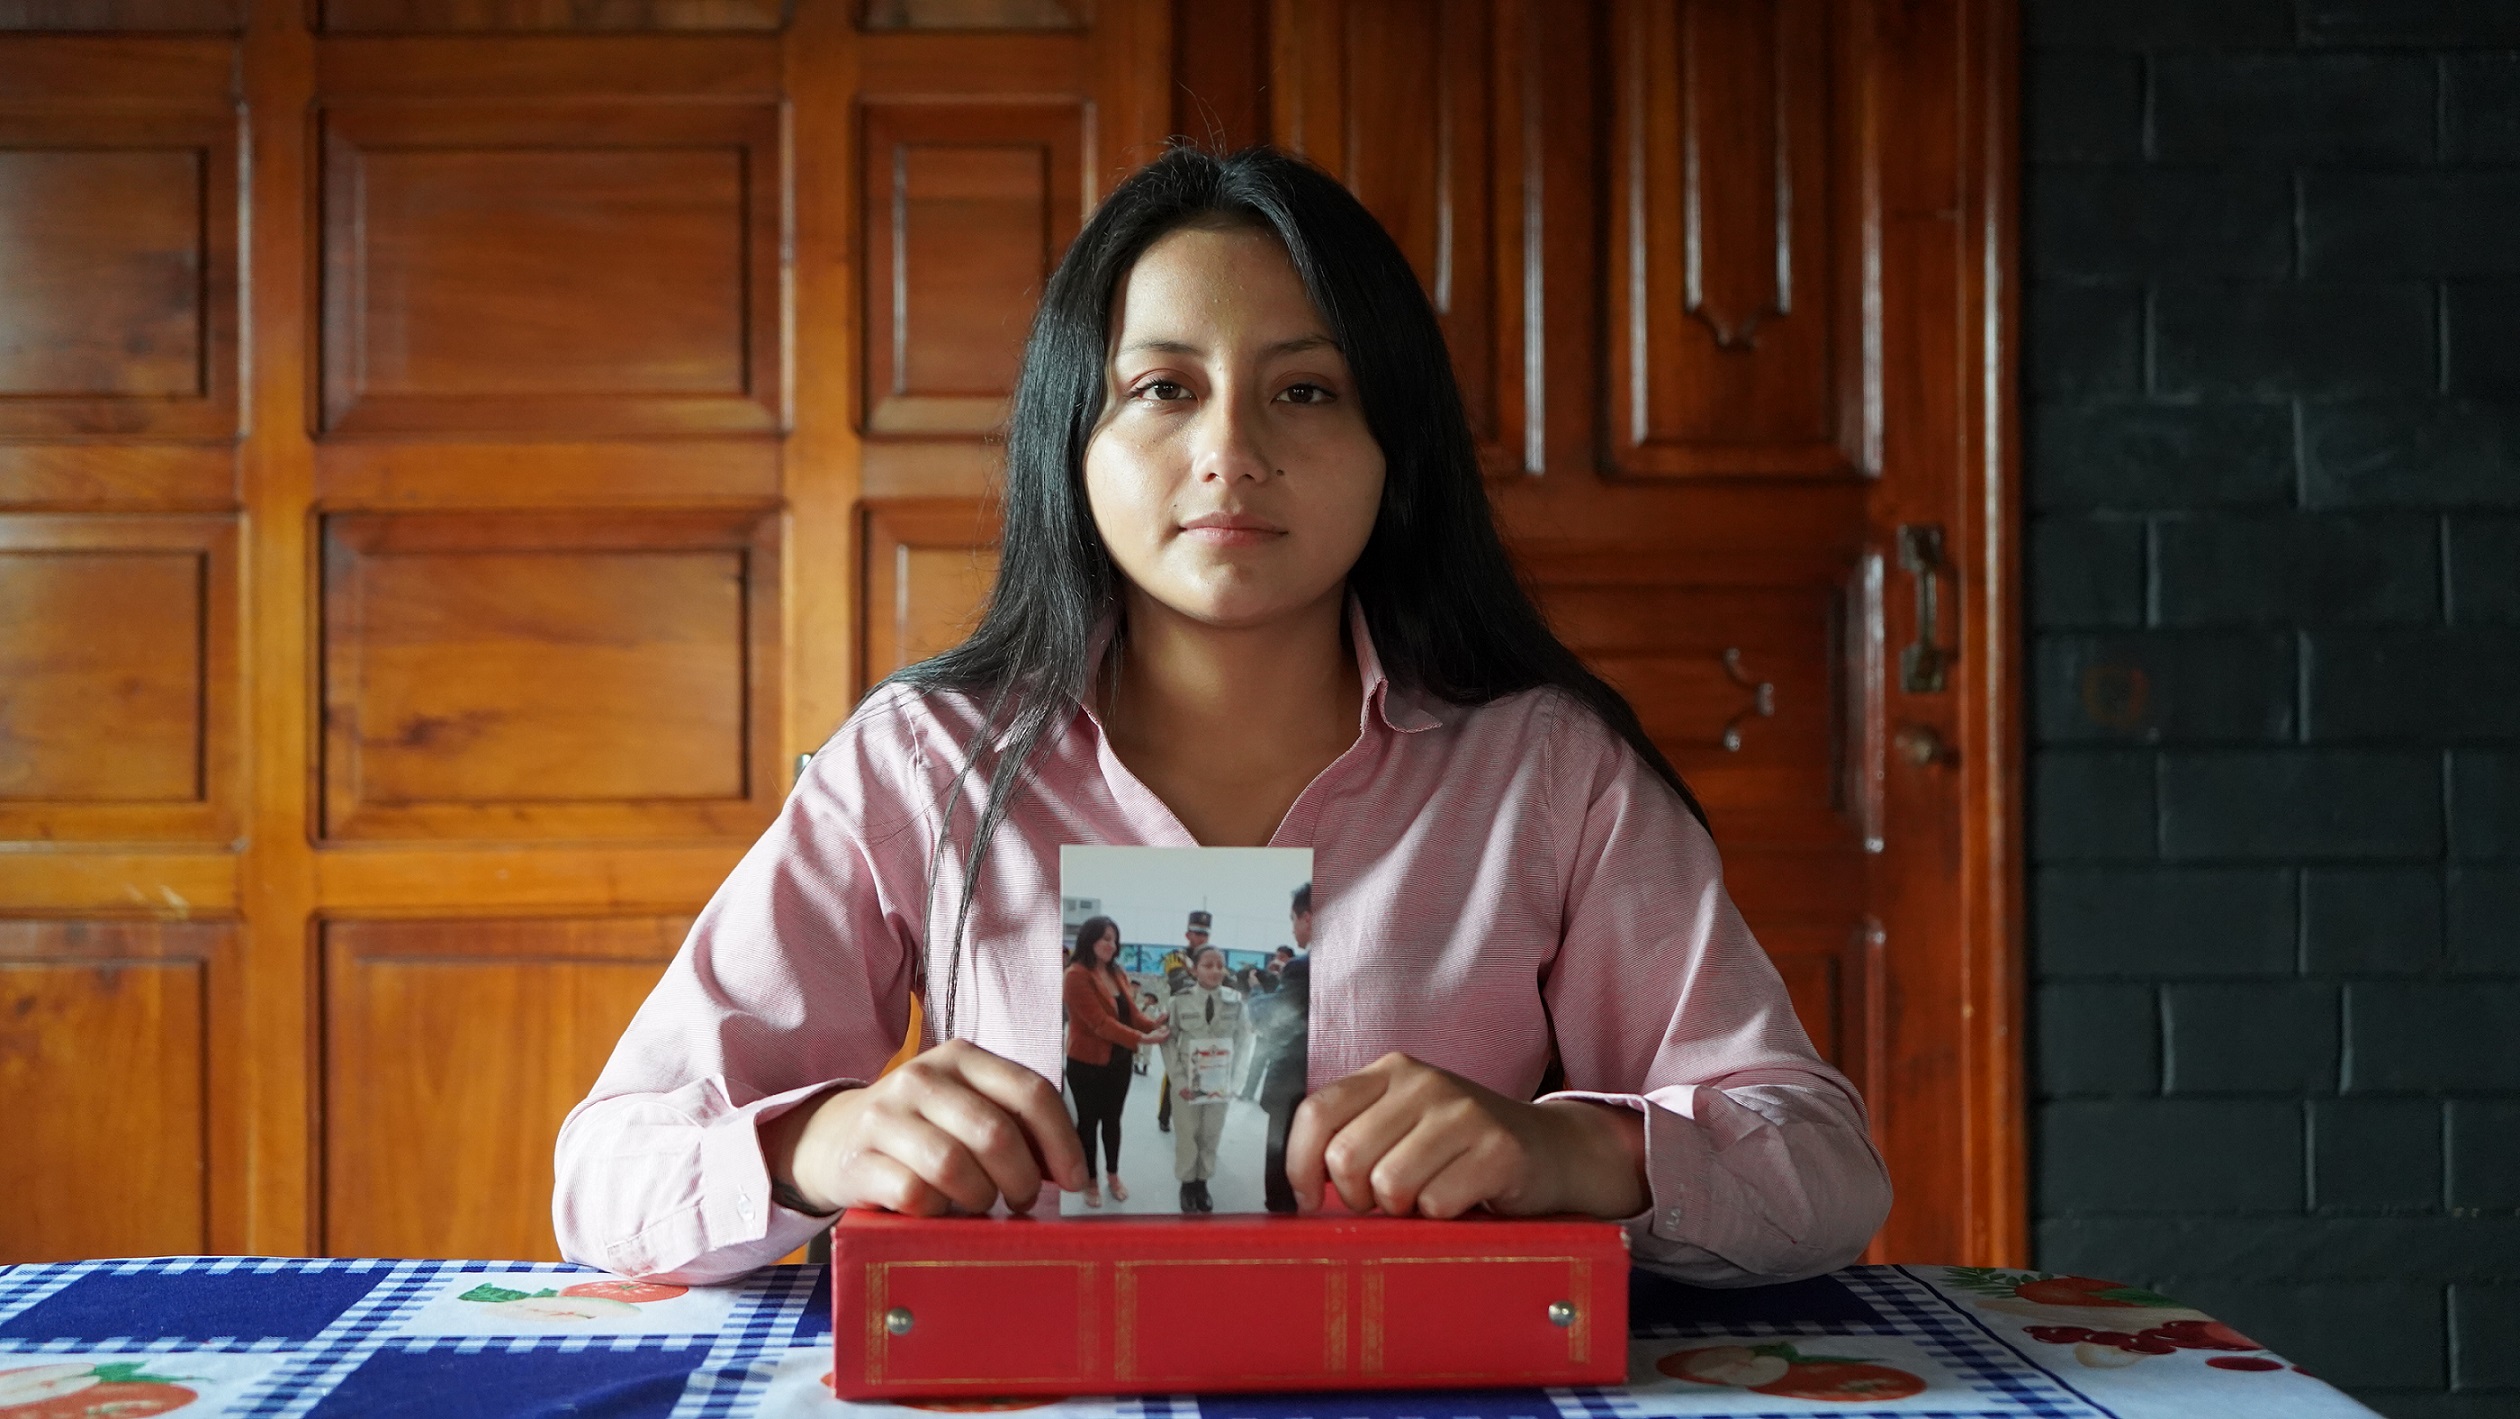 Brazzers School Girl - School-Related Sexual Violence and Young Survivors' Struggle for Justice in  Ecuador | HRW